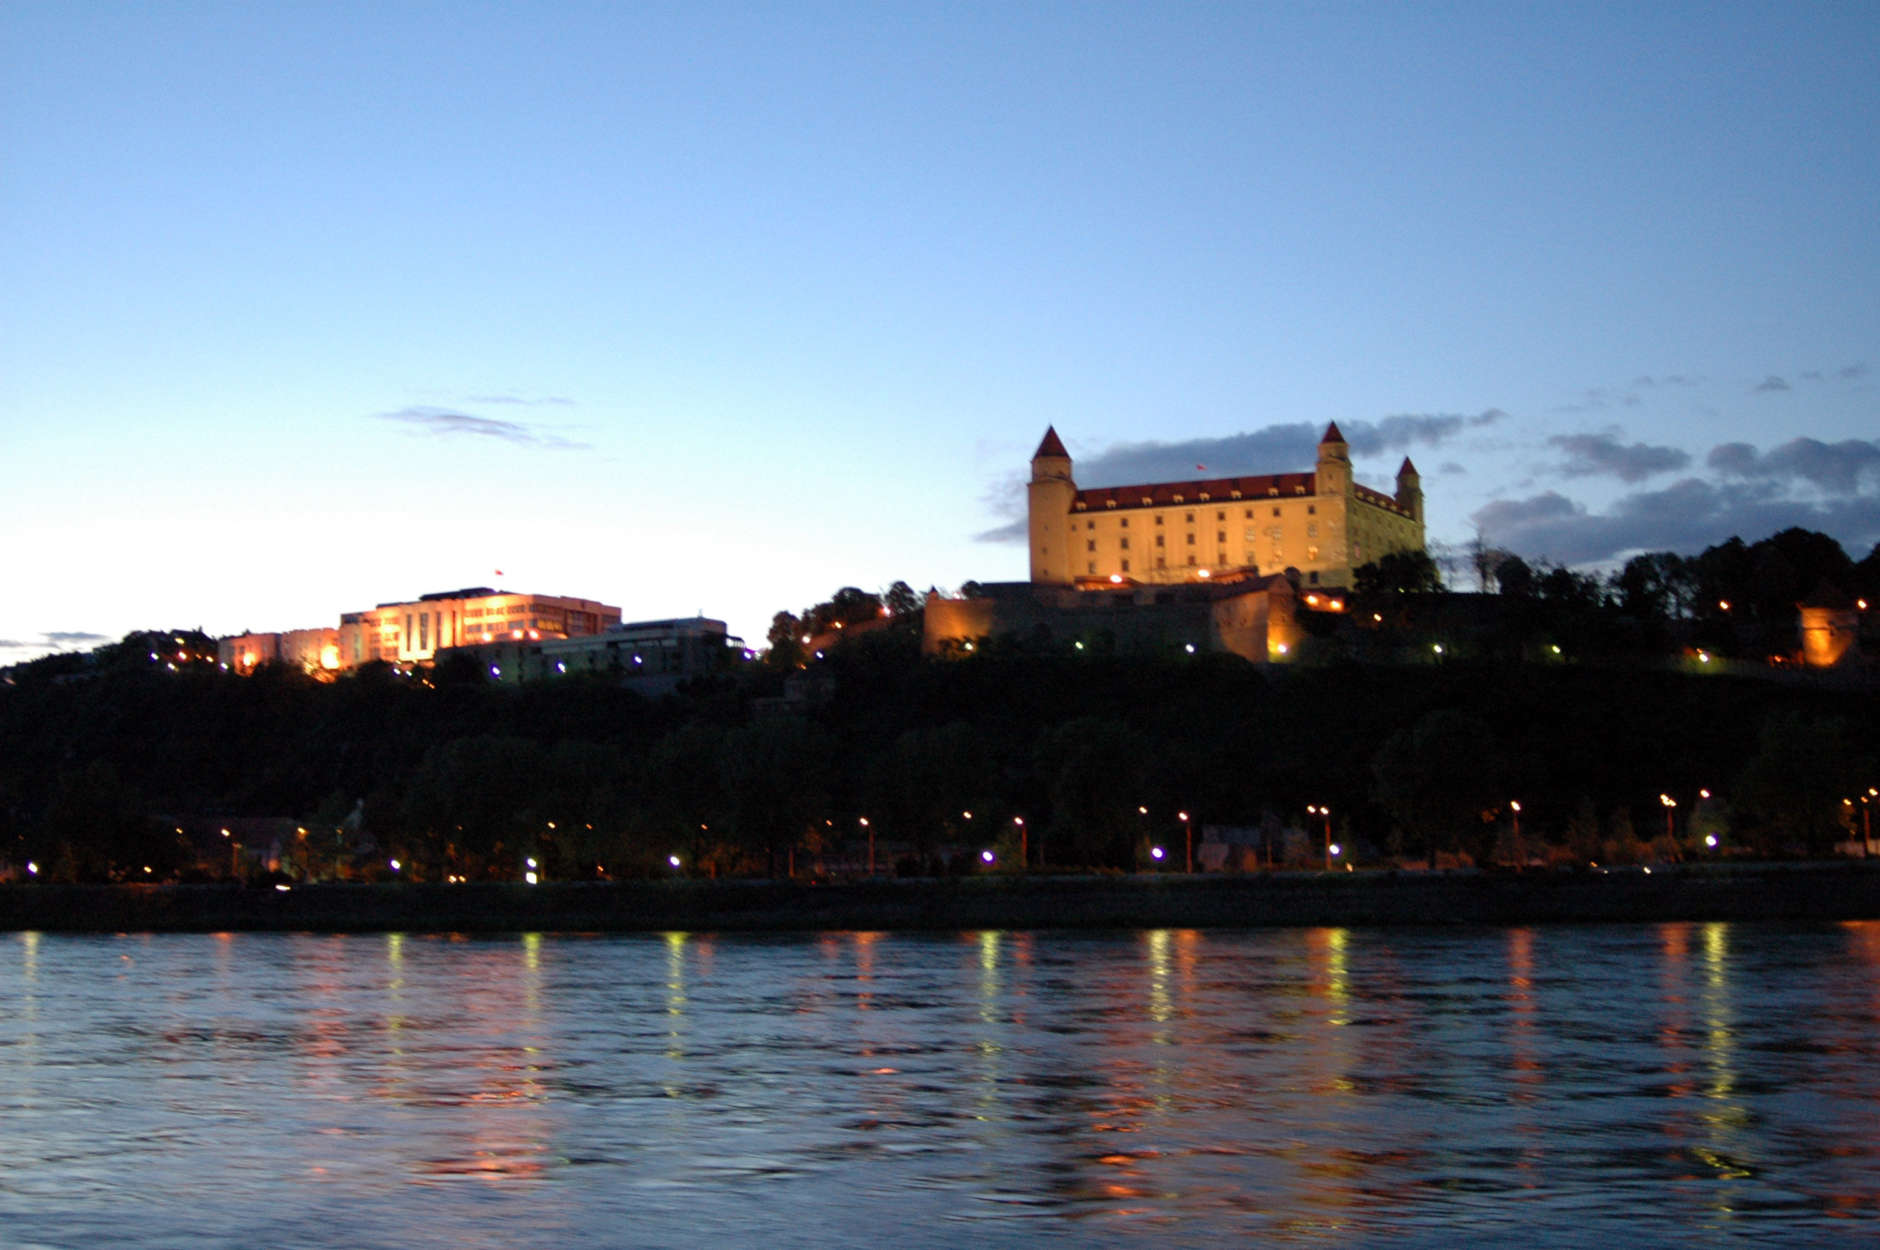 ** FILE ** The Bratislava castle is illuminated above river Danube in this May 8, 2005 file photo. The house of Slovak parliament can be seen at left. (AP Photo/Jan Koller, CTK)